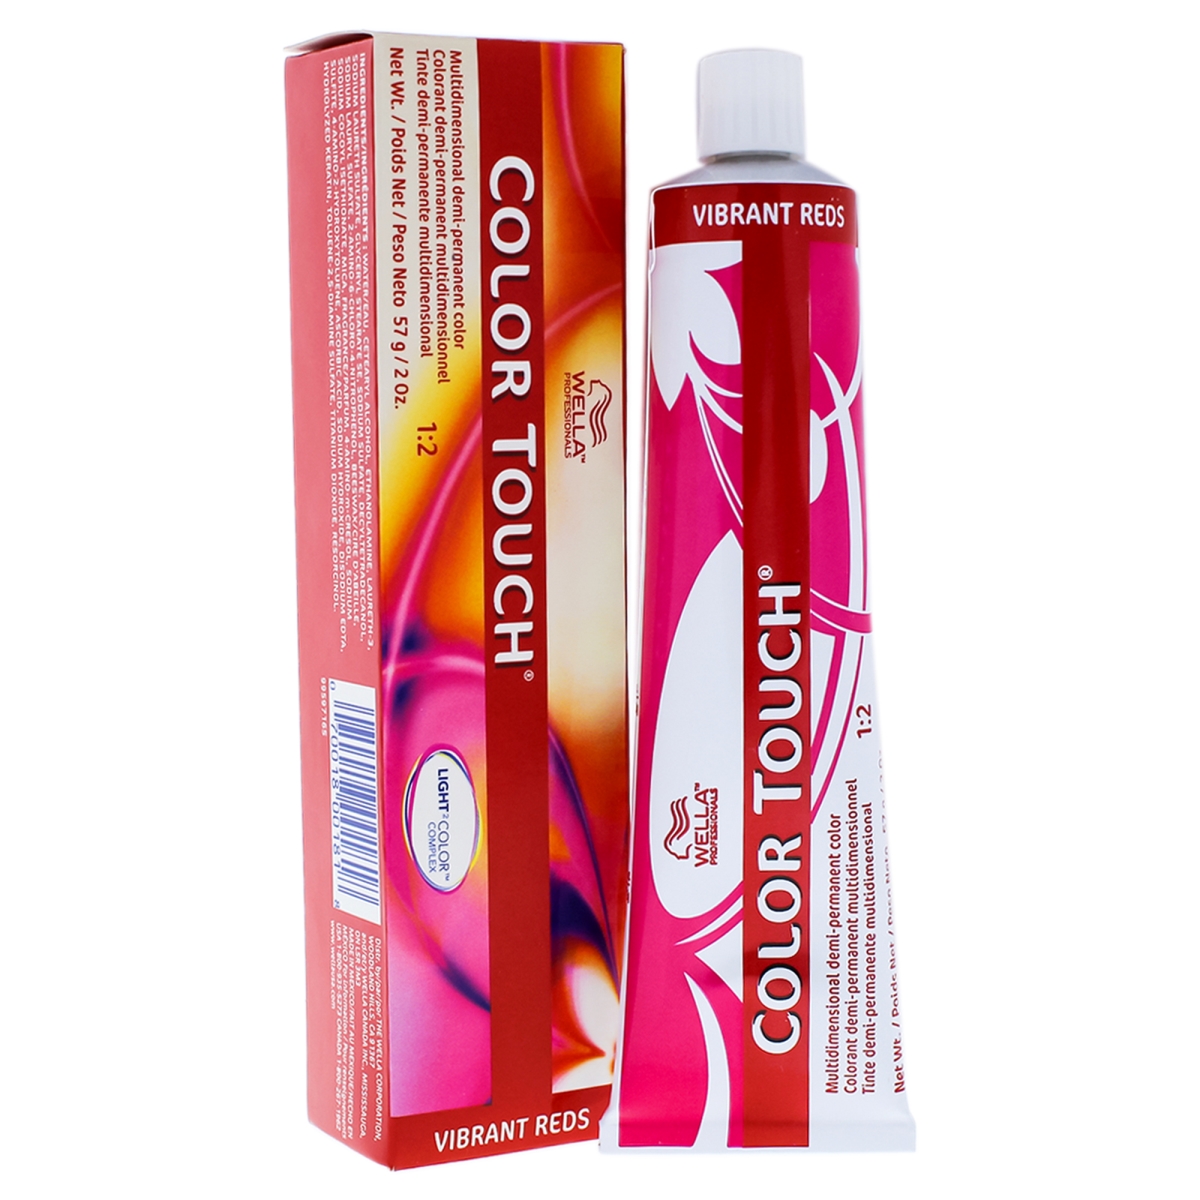 I0086973 Color Touch Demi & Permanent Hair Color For Unisex - 8 43 Light Blonde & Red Gold - 2 Oz